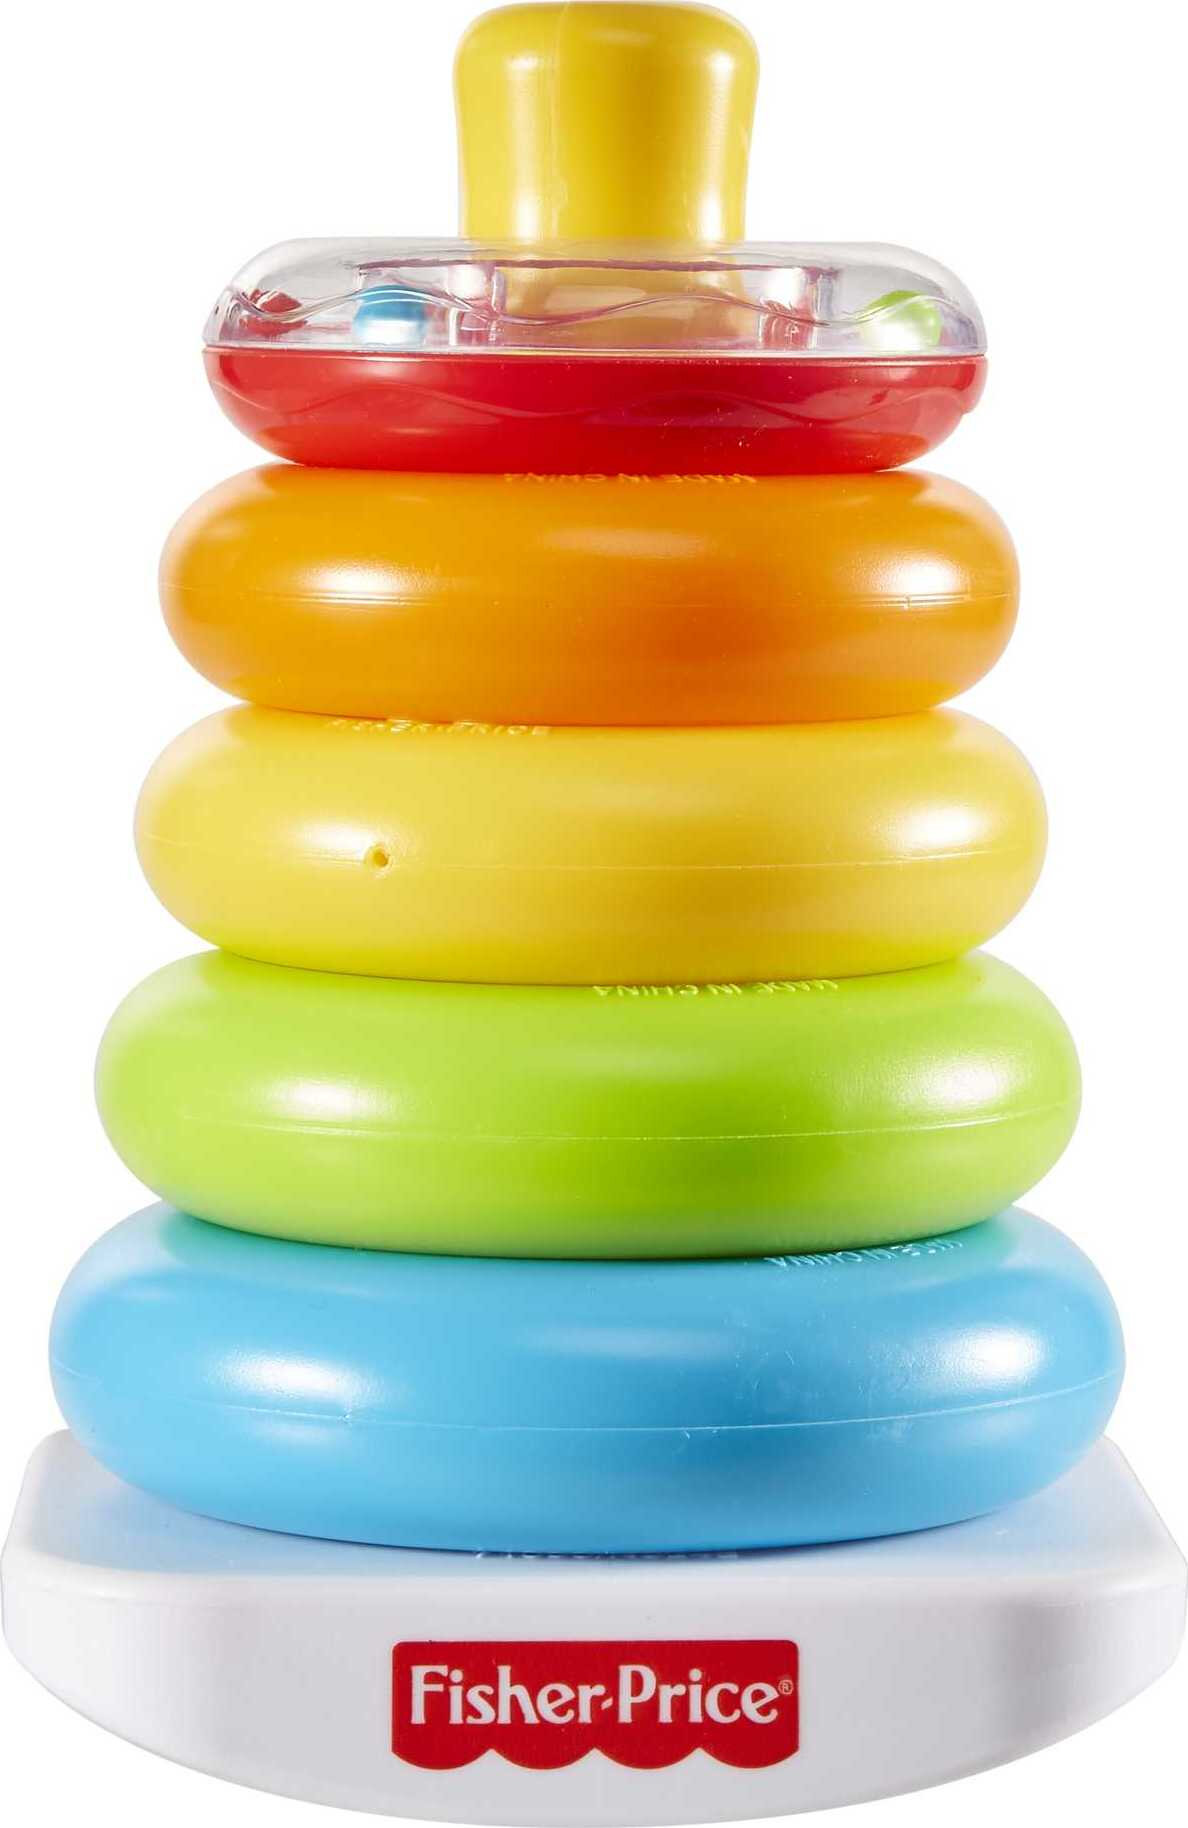 Fisher-Price Rock-a-Stack Ring Stacking Toy with Roly-Poly Base for Infants - image 5 of 6